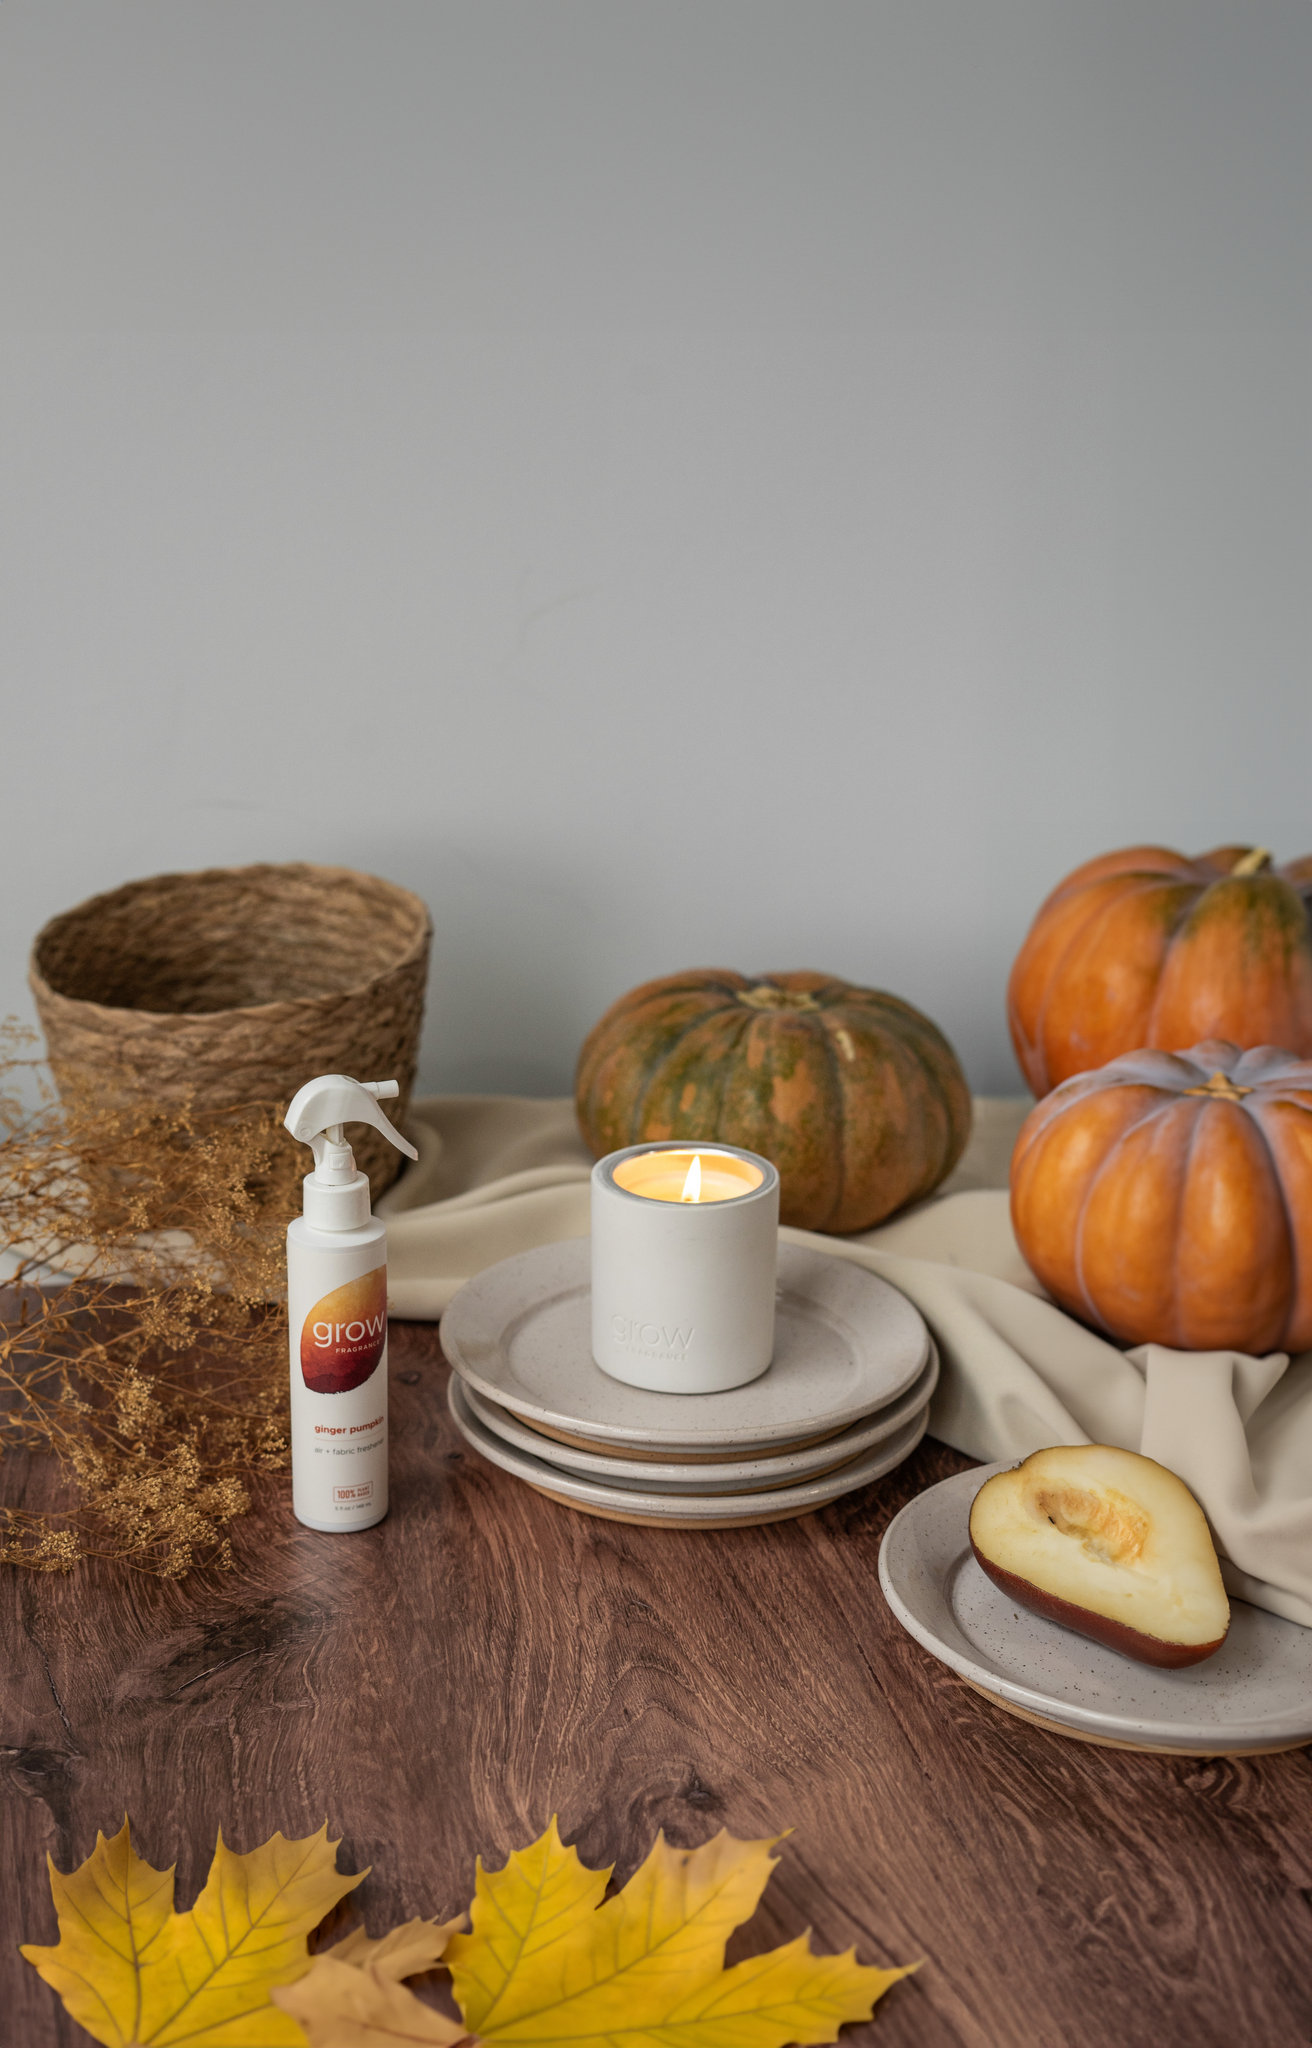 Fall Porch Revival: Nontoxic Air Fresheners & Sustainable Candles" "Scented Porch Transformation: Fall Air Fresheners & Eco-Friendly Candles" "Create Cozy Porch Vibes with Nontoxic Fall Scents & Plant-Based Candles" "Fall Porch Decor: Discover Nontoxic Scents and Sustainable Candles" "Elevate Your Porch Experience with Nontoxic Fall Scents & Natural Candles